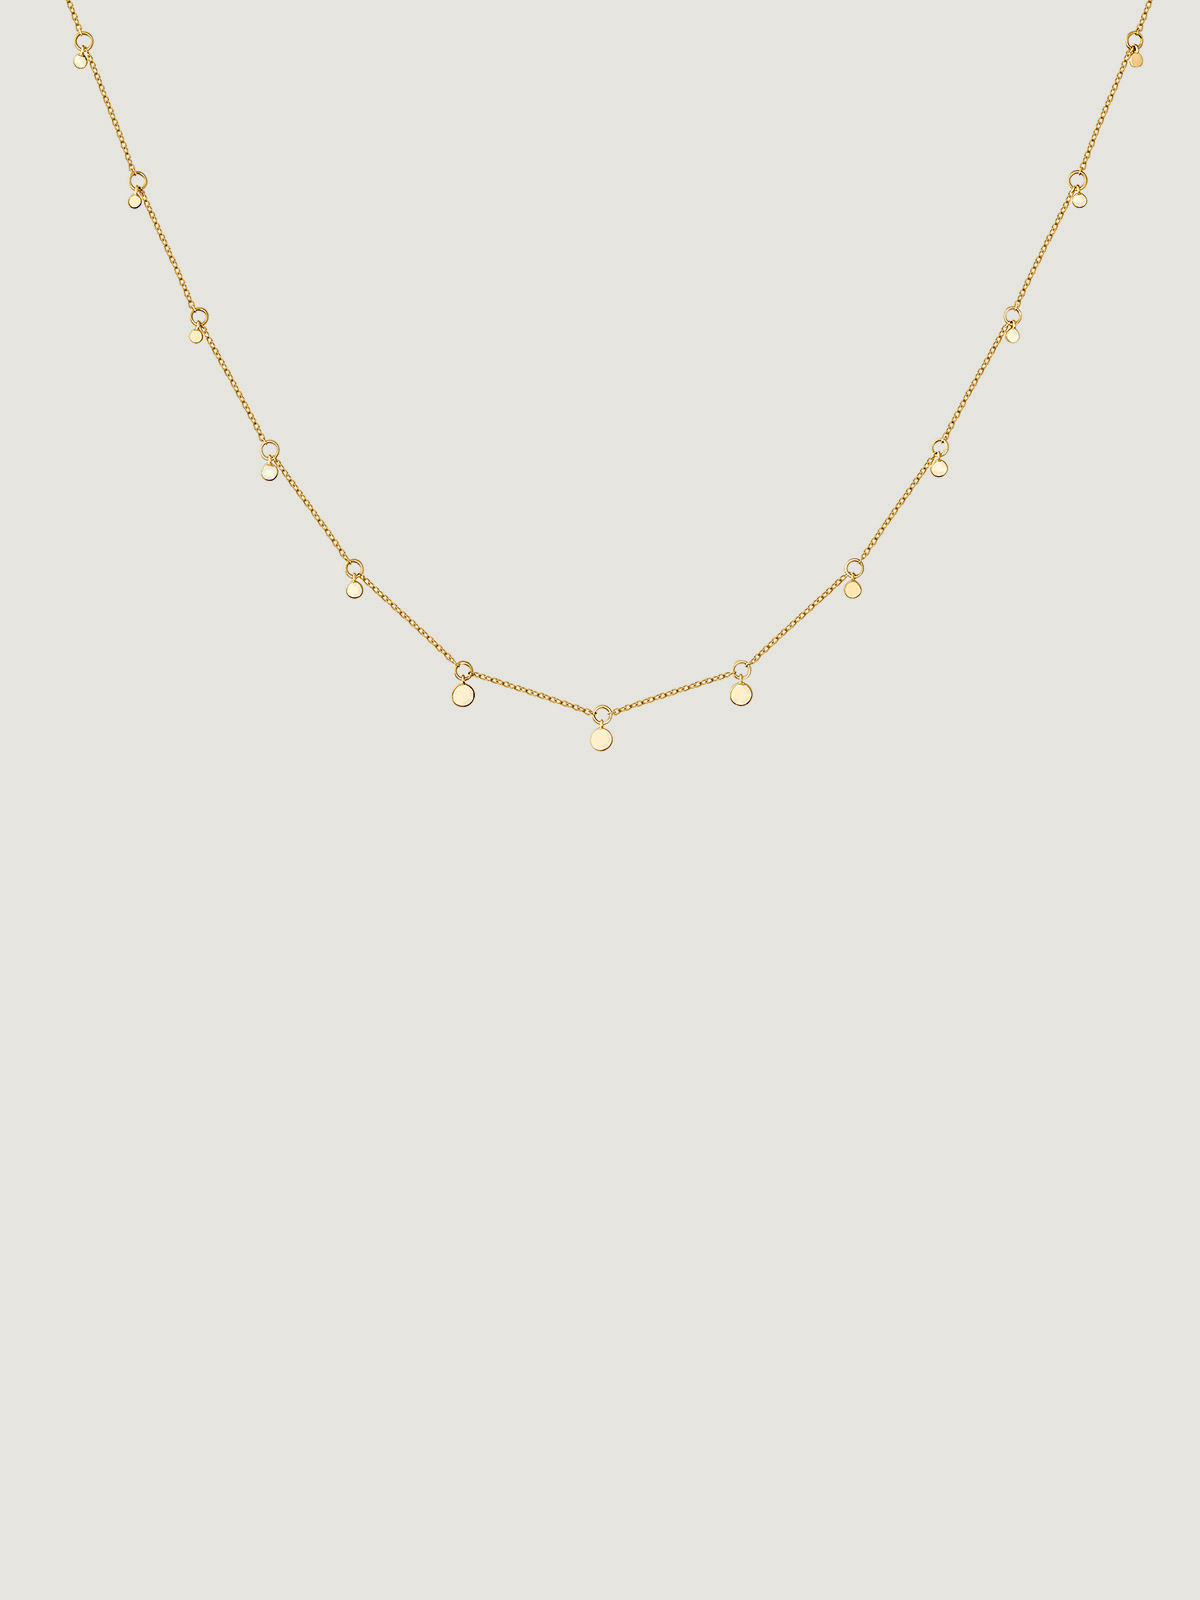 9K Yellow Gold Necklace with Spheres